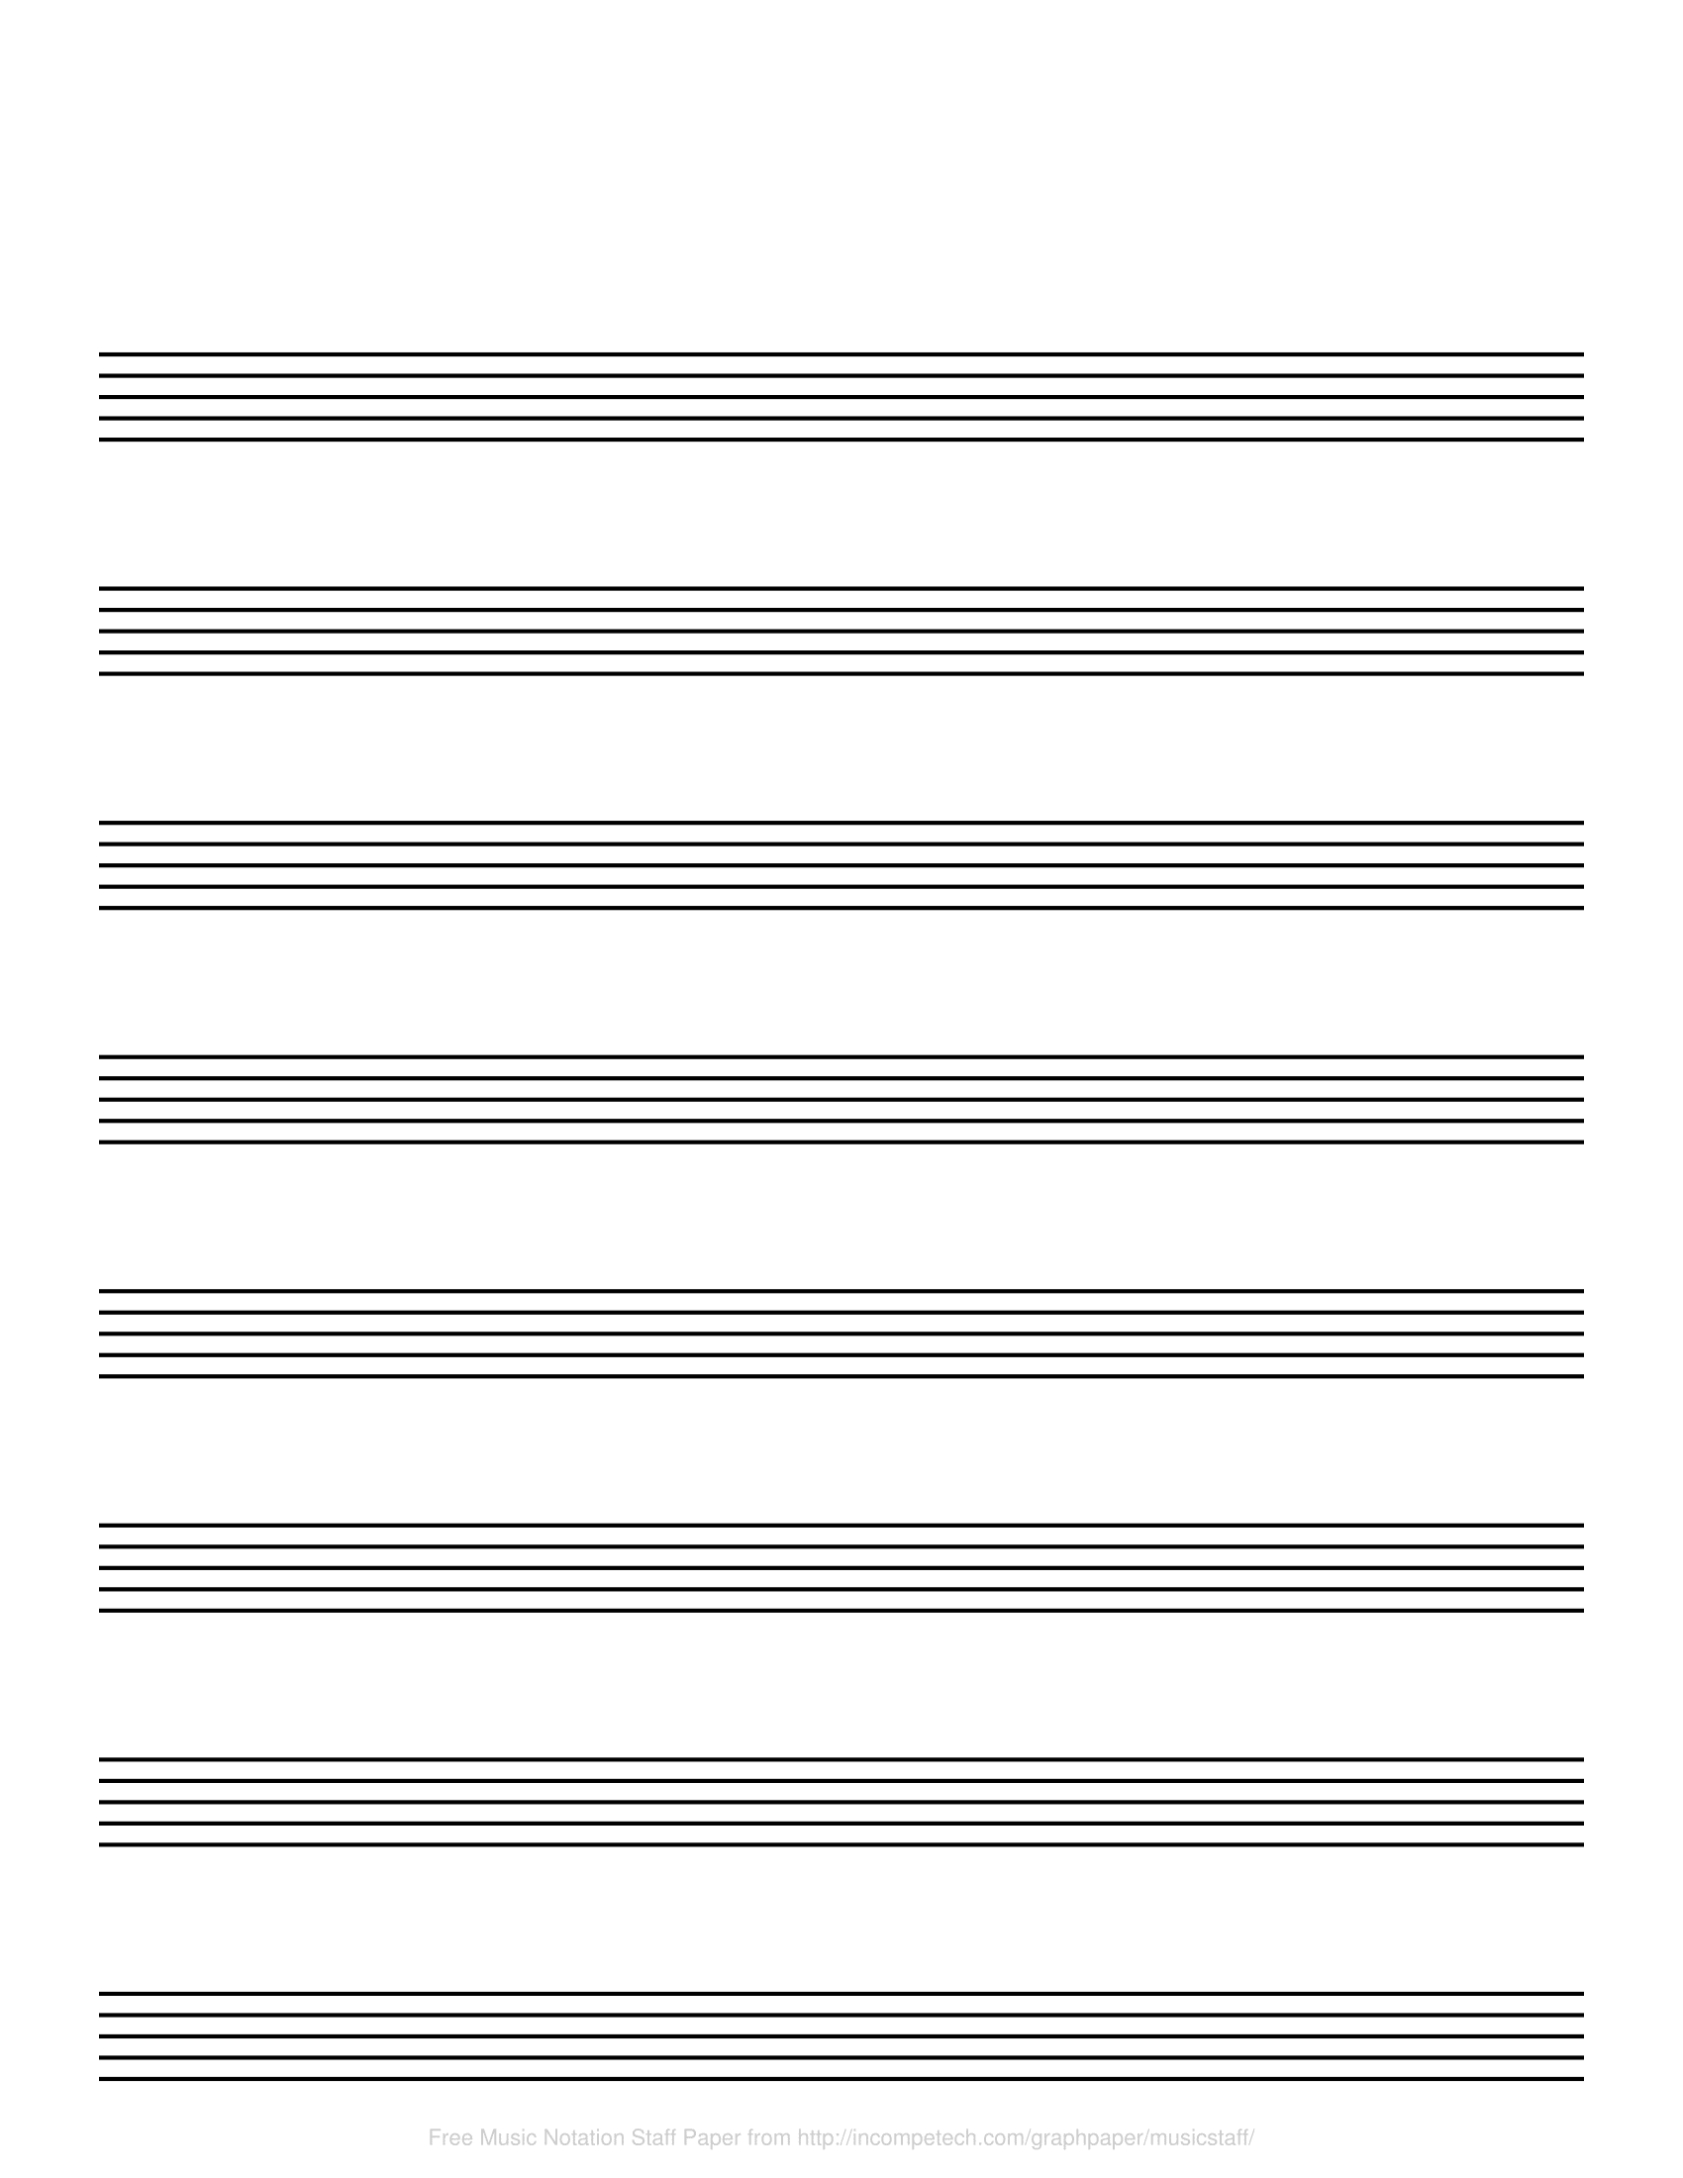 Free Online Graph Paper / Music Notation - Free Printable Music Staff Inside Music Notes Paper Template